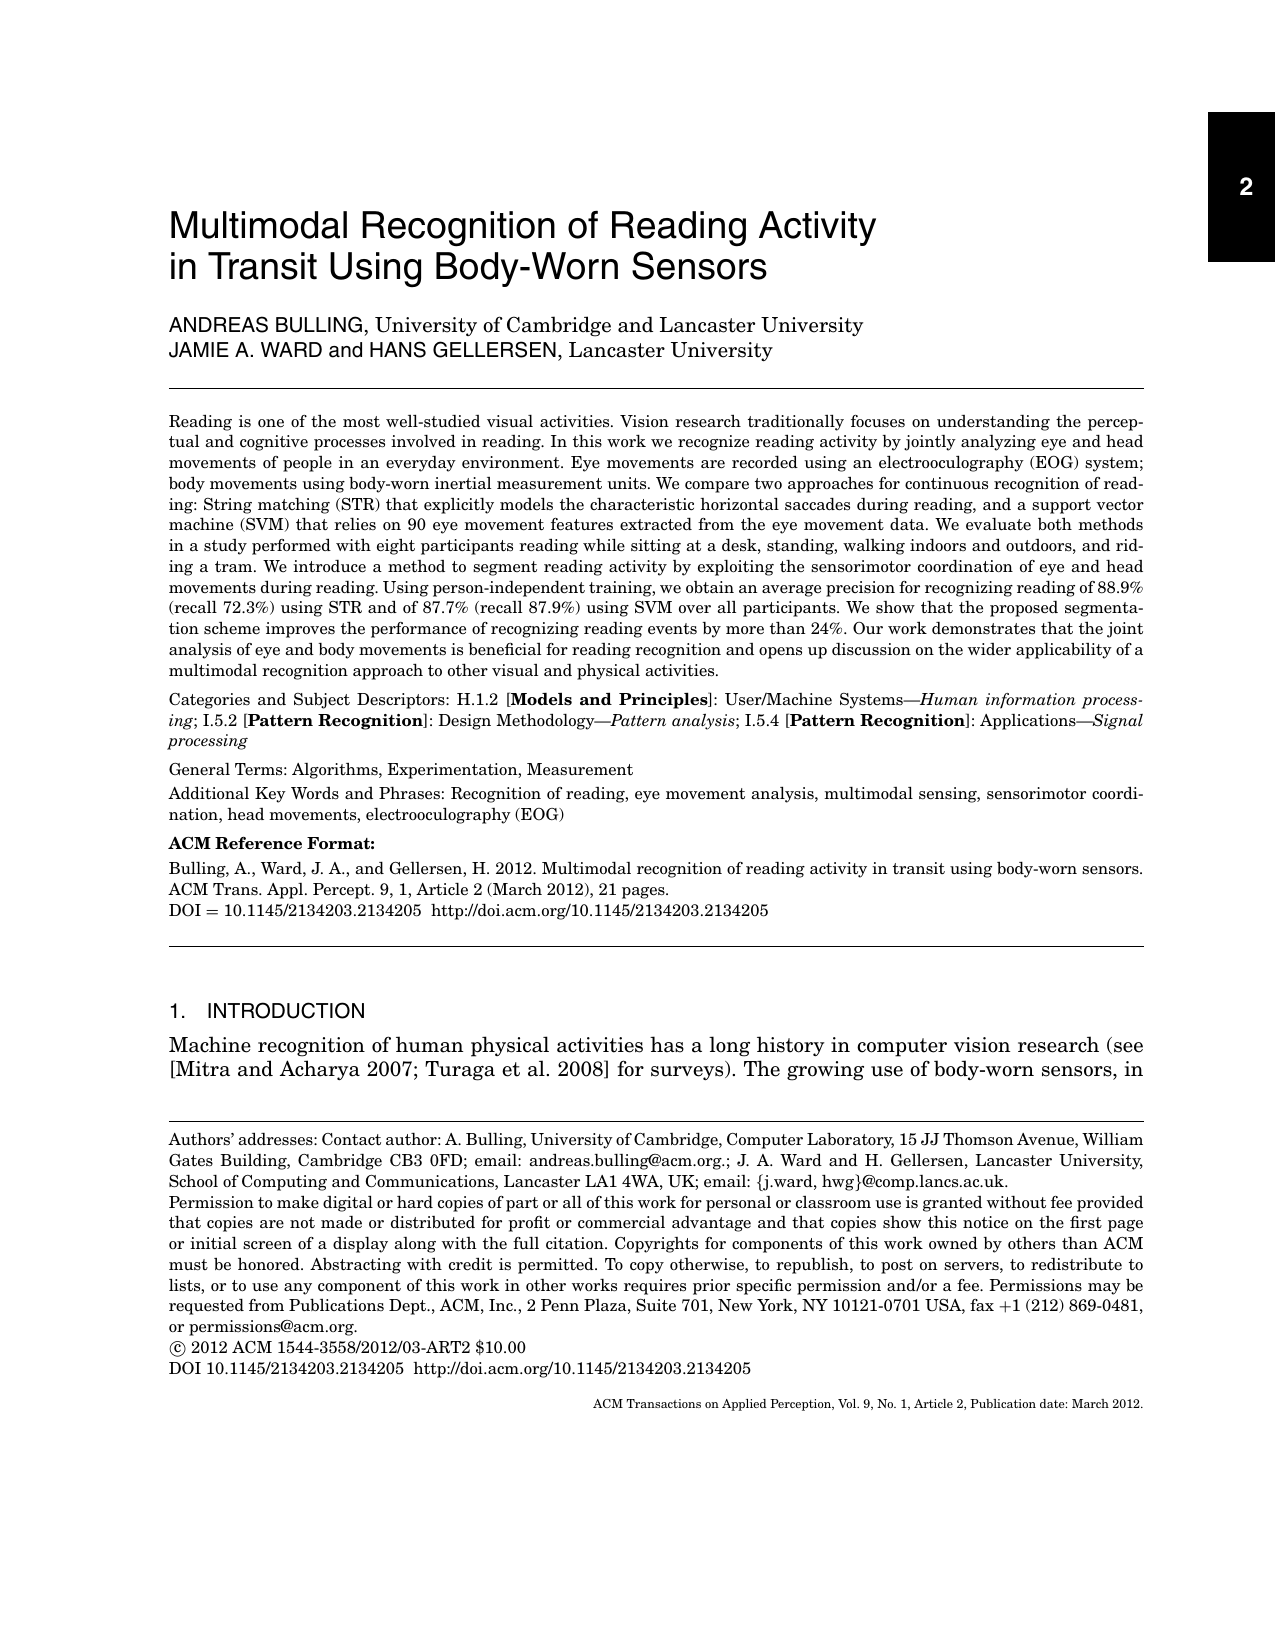 Multimodal Recognition of Reading Activity in Transit Using Body-Worn Sensors